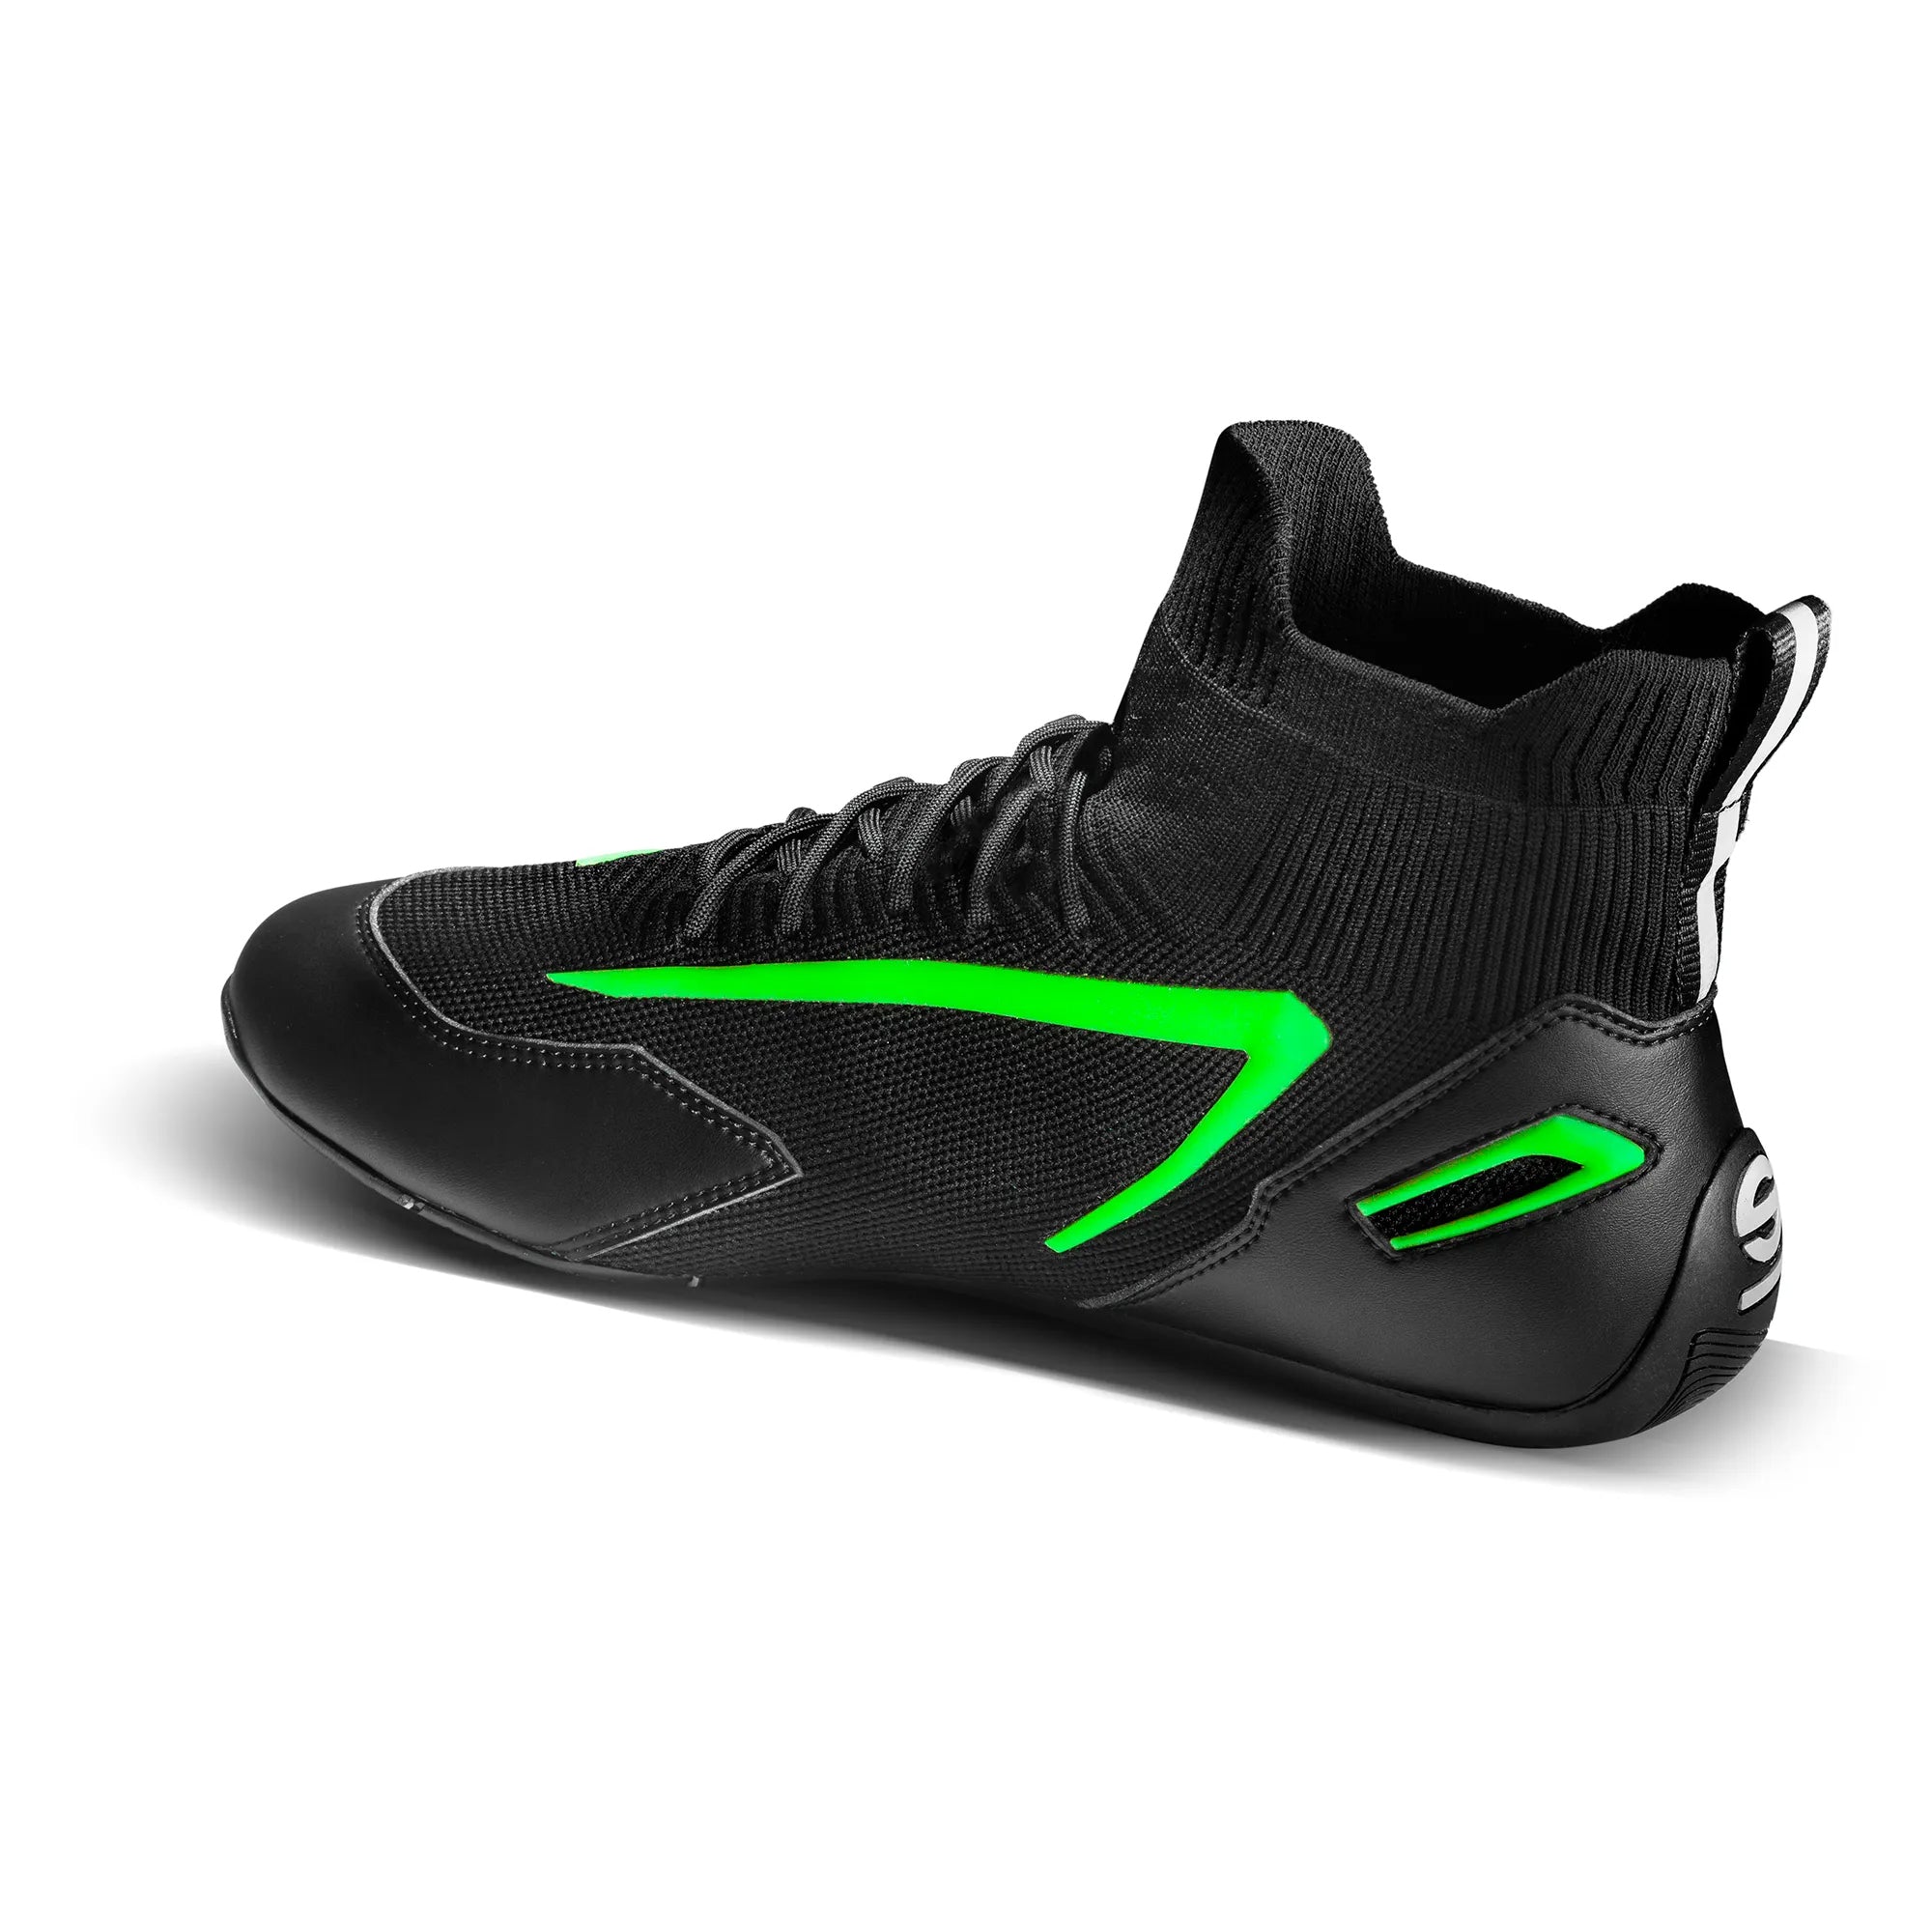 SPARCO 00129346NRVF Gaming sim racing shoes HYPERDRIVE, black/green, size 46 Photo-2 